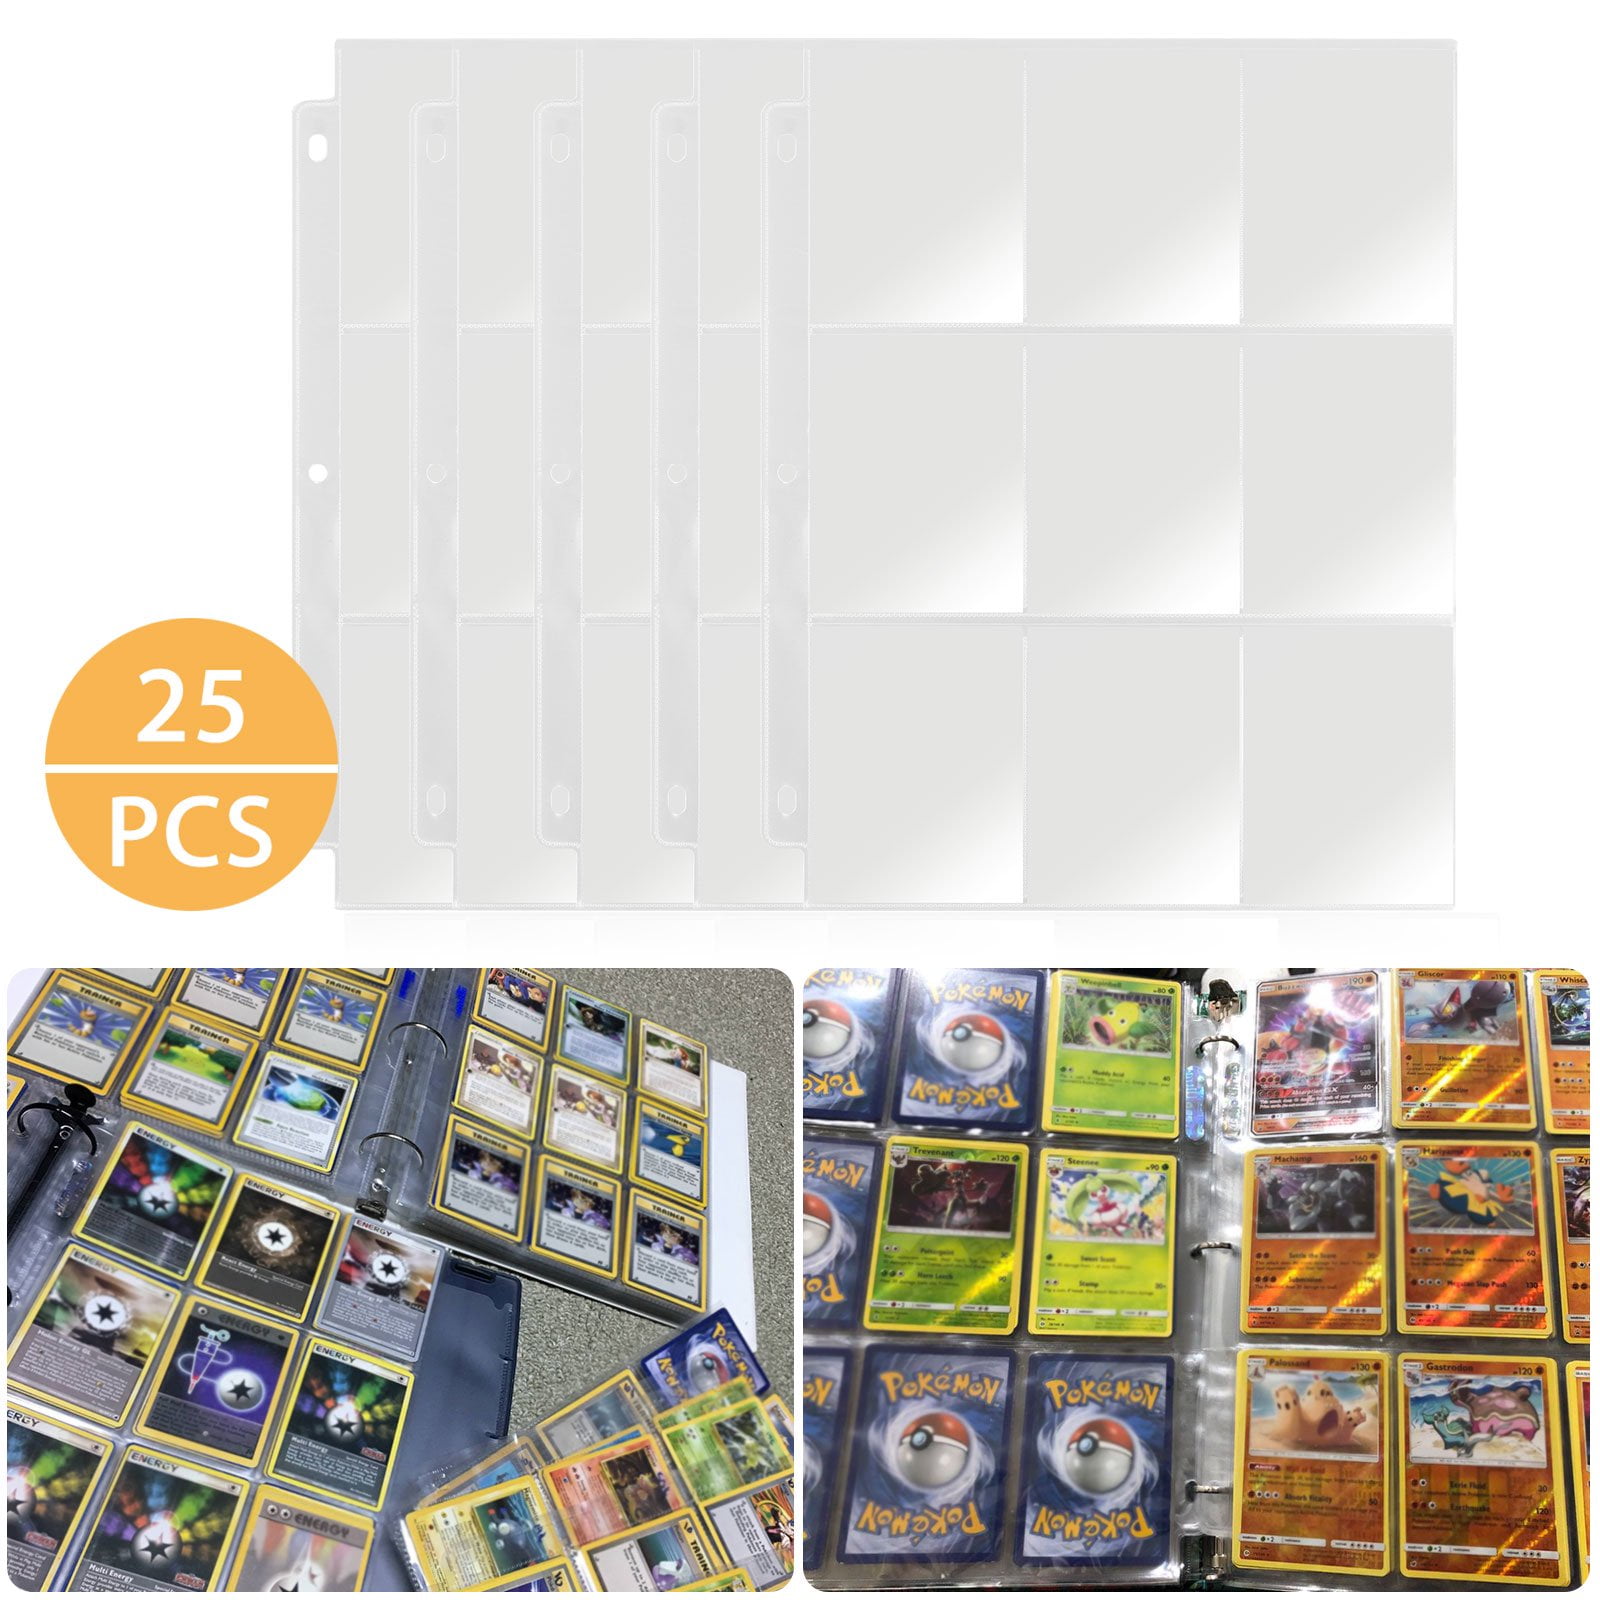 25Pcs Card Sleeves Collector Binder Holder Cards Protectors for Pokemon, Album Organizer Card Binder Perfect for Skylanders, Top Trumps, Baseball Collection, Tarot Card -